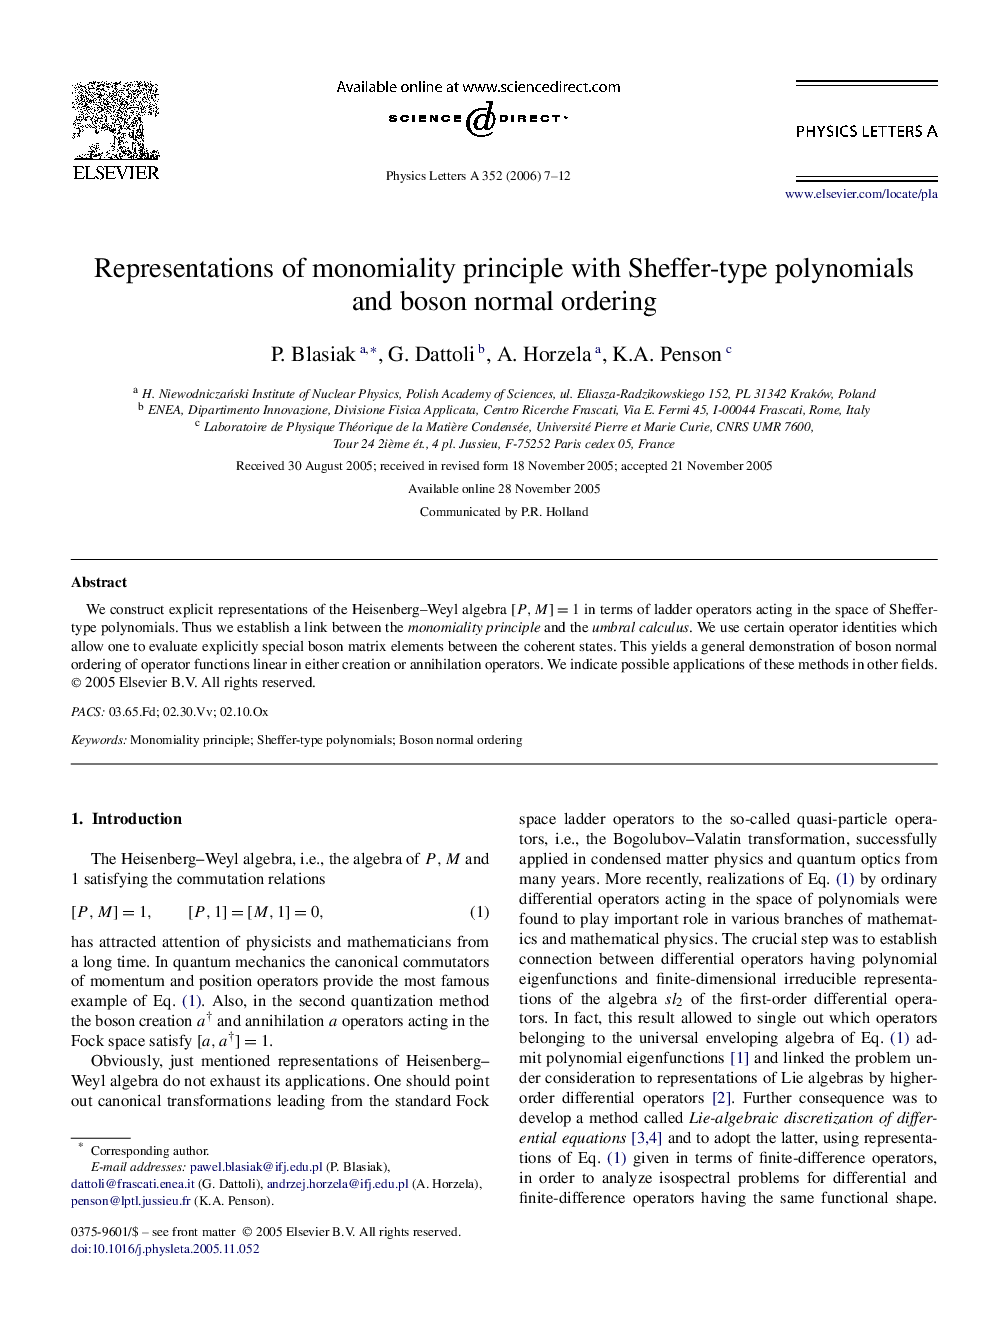 Representations of monomiality principle with Sheffer-type polynomials and boson normal ordering